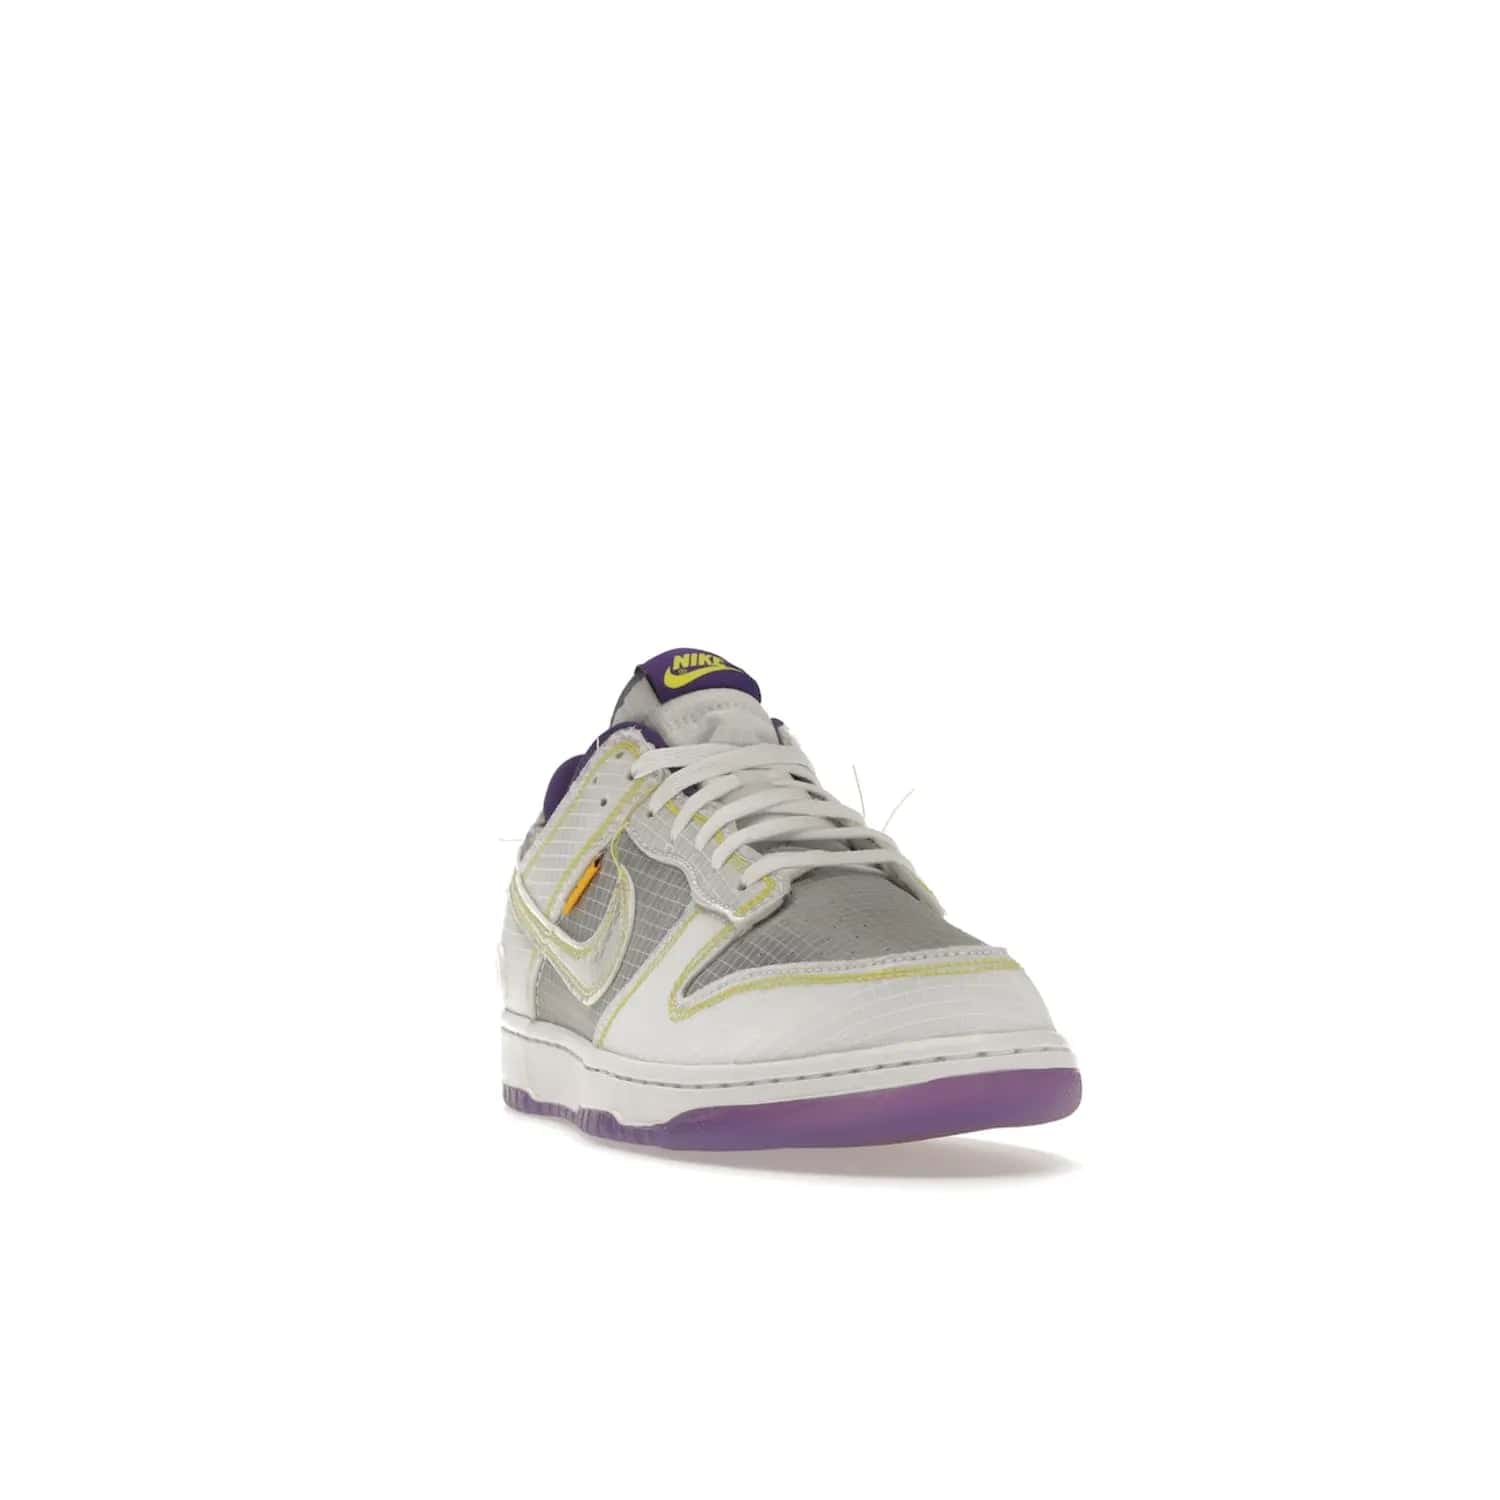 Nike Dunk Low Union Passport Pack Court Purple - Image 8 - Only at www.BallersClubKickz.com - Nike Dunk Low Union LA Passport Pack Court Purple features Court Purple and white smooth leather construction and Union LA Frontman logo on the heel. Releasing in April of 2022, this iconic shoe will make a splash in the streetwear world.